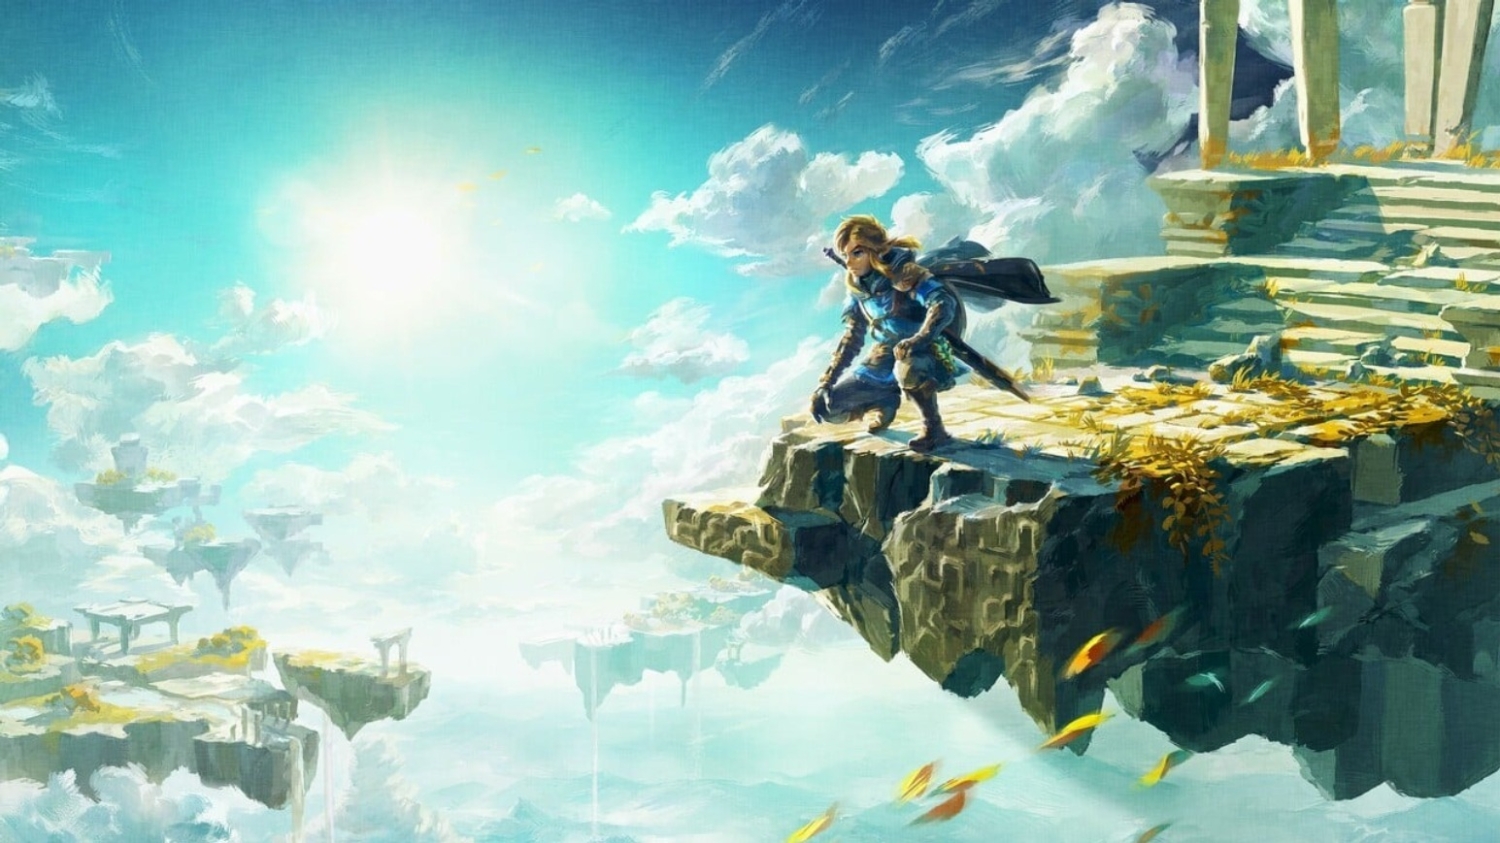 Nintendo Shows Developers 'Breath of the Wild' Running on Switch 2